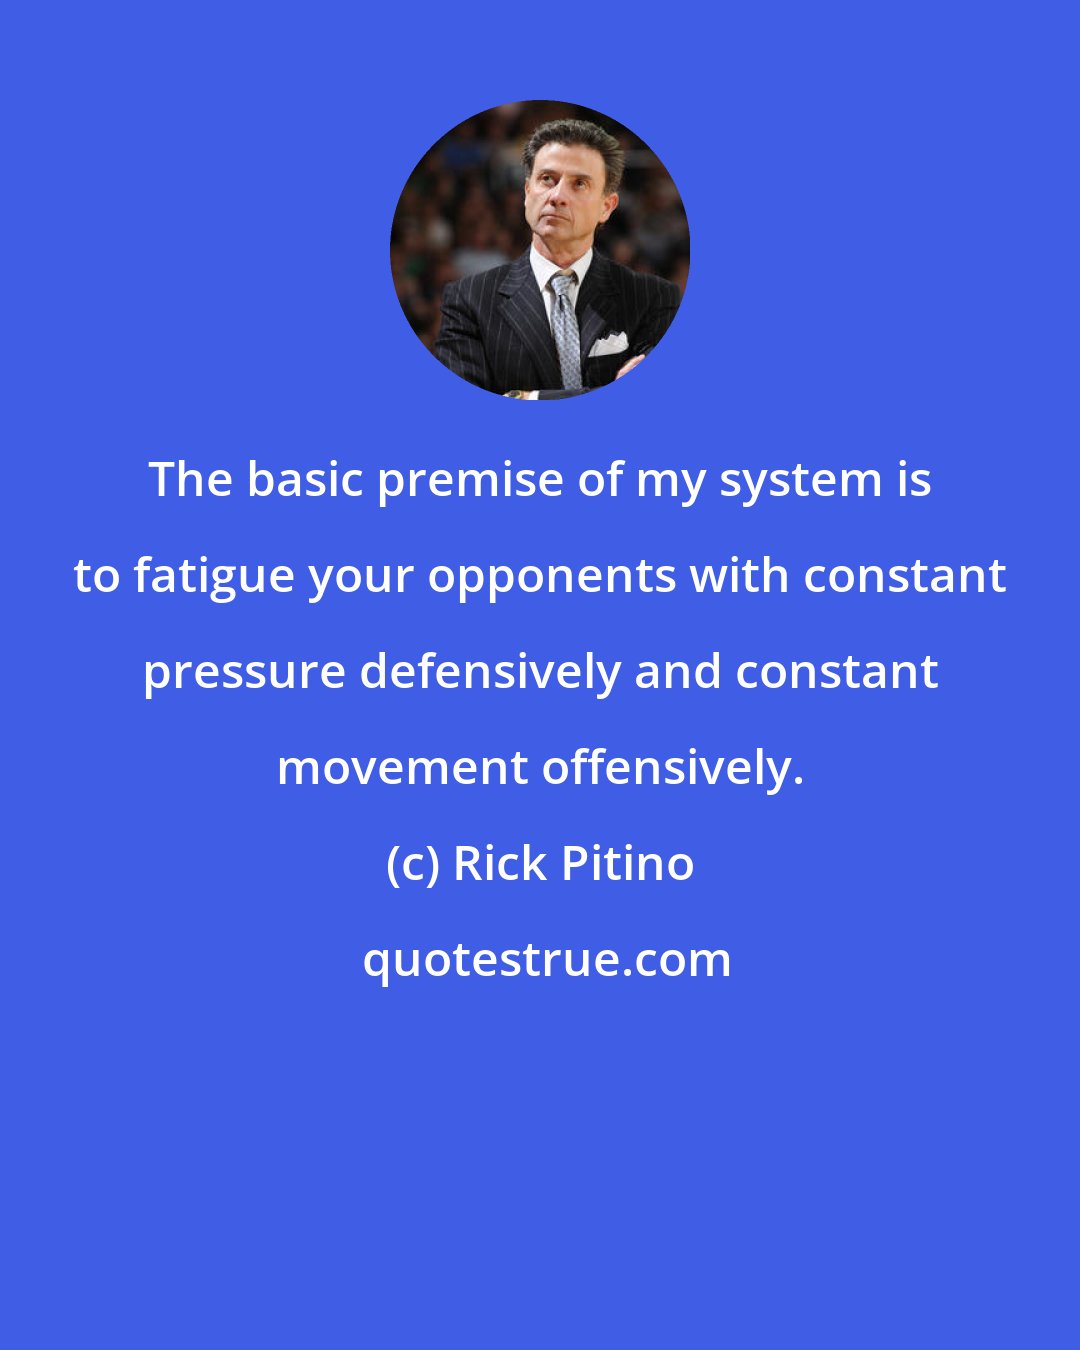 Rick Pitino: The basic premise of my system is to fatigue your opponents with constant pressure defensively and constant movement offensively.